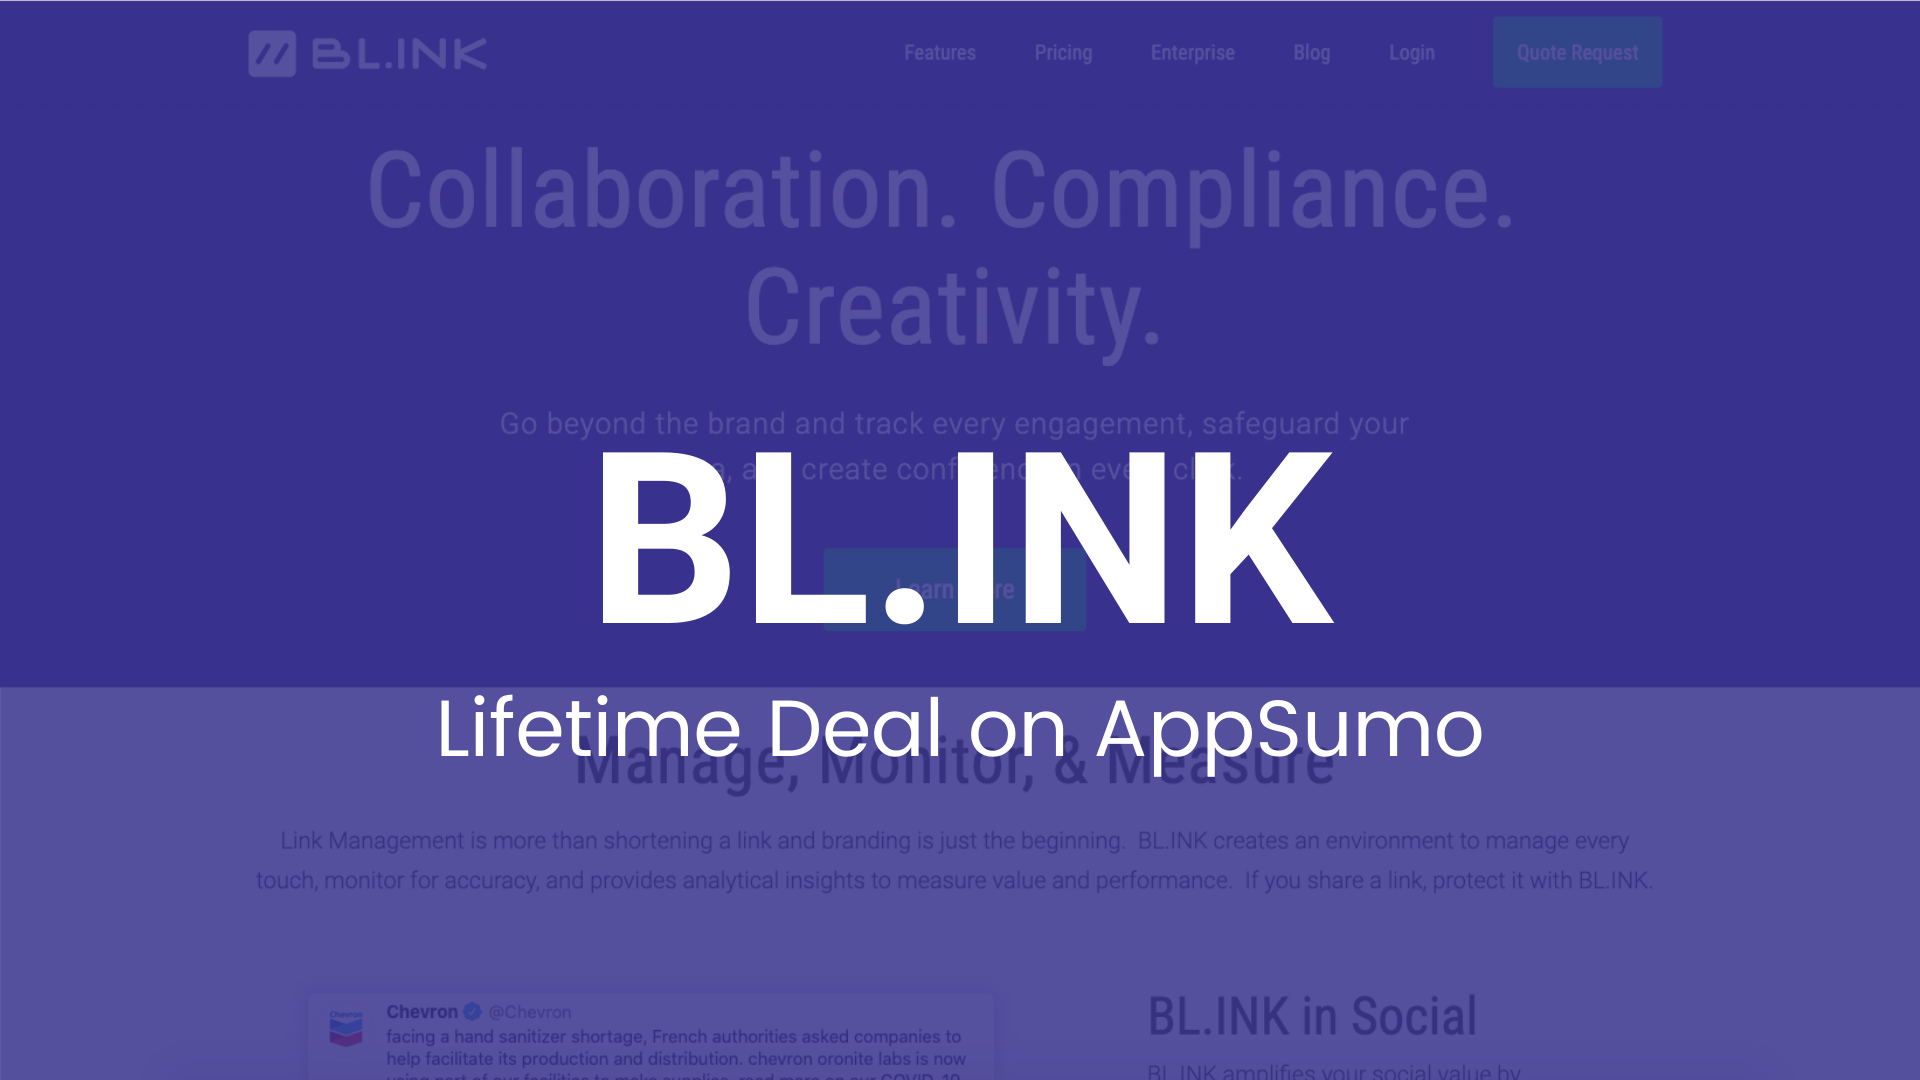 BL.INK: Tracking and Measuring Clicks and Engagements